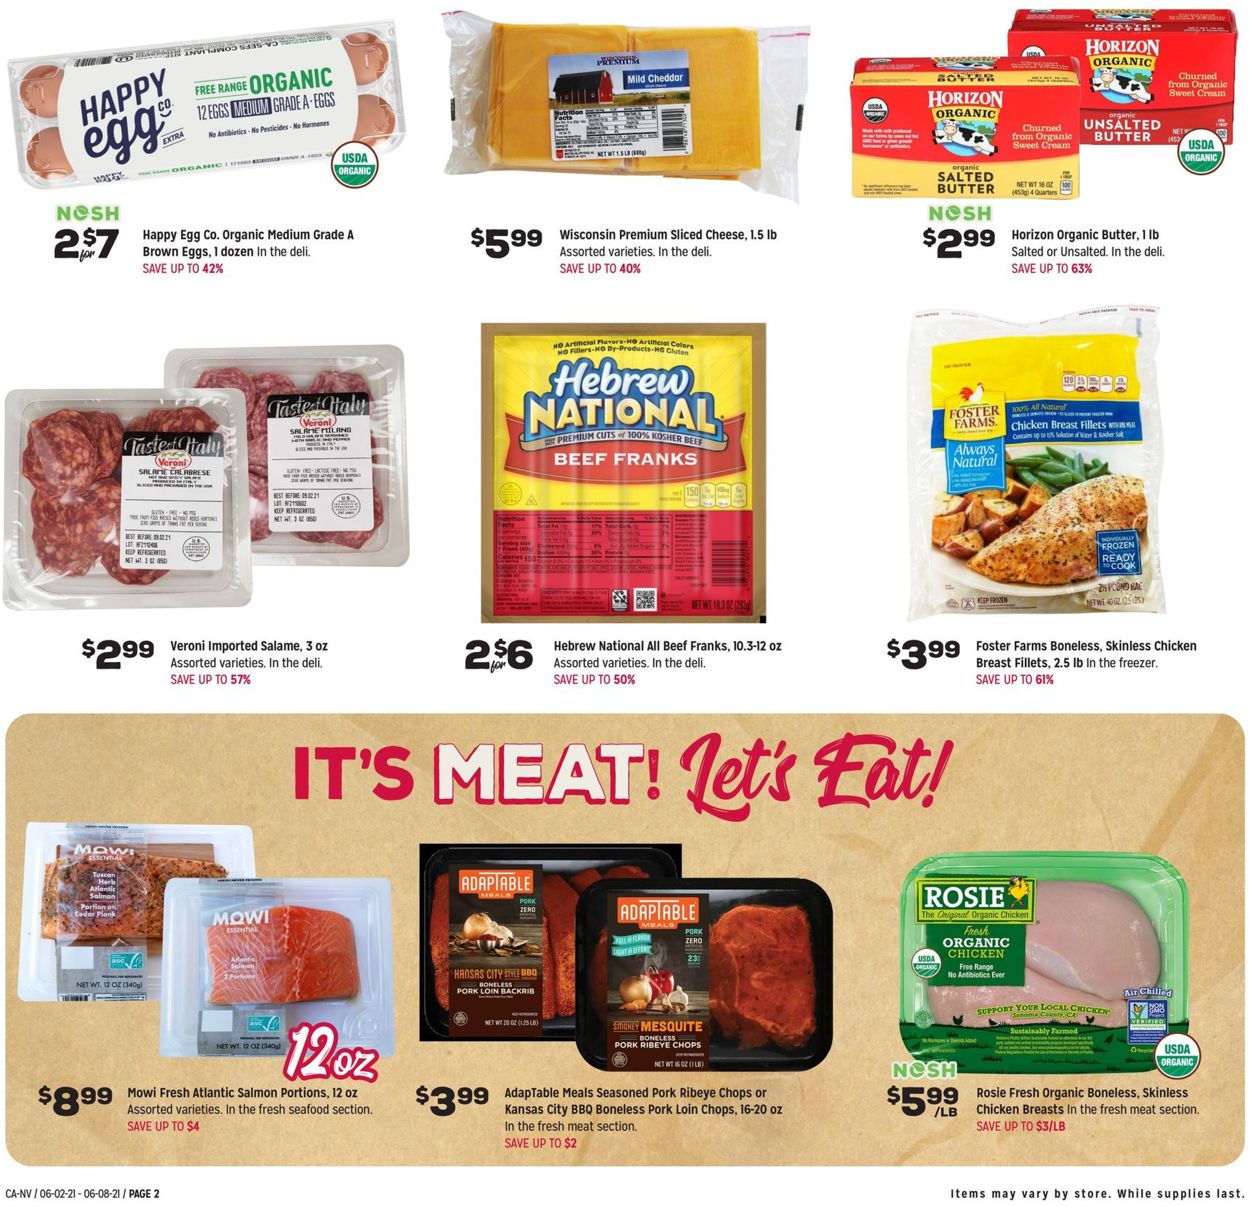 Grocery Outlet Weekly Ad Circular - valid 06/02-06/08/2021 (Page 2)